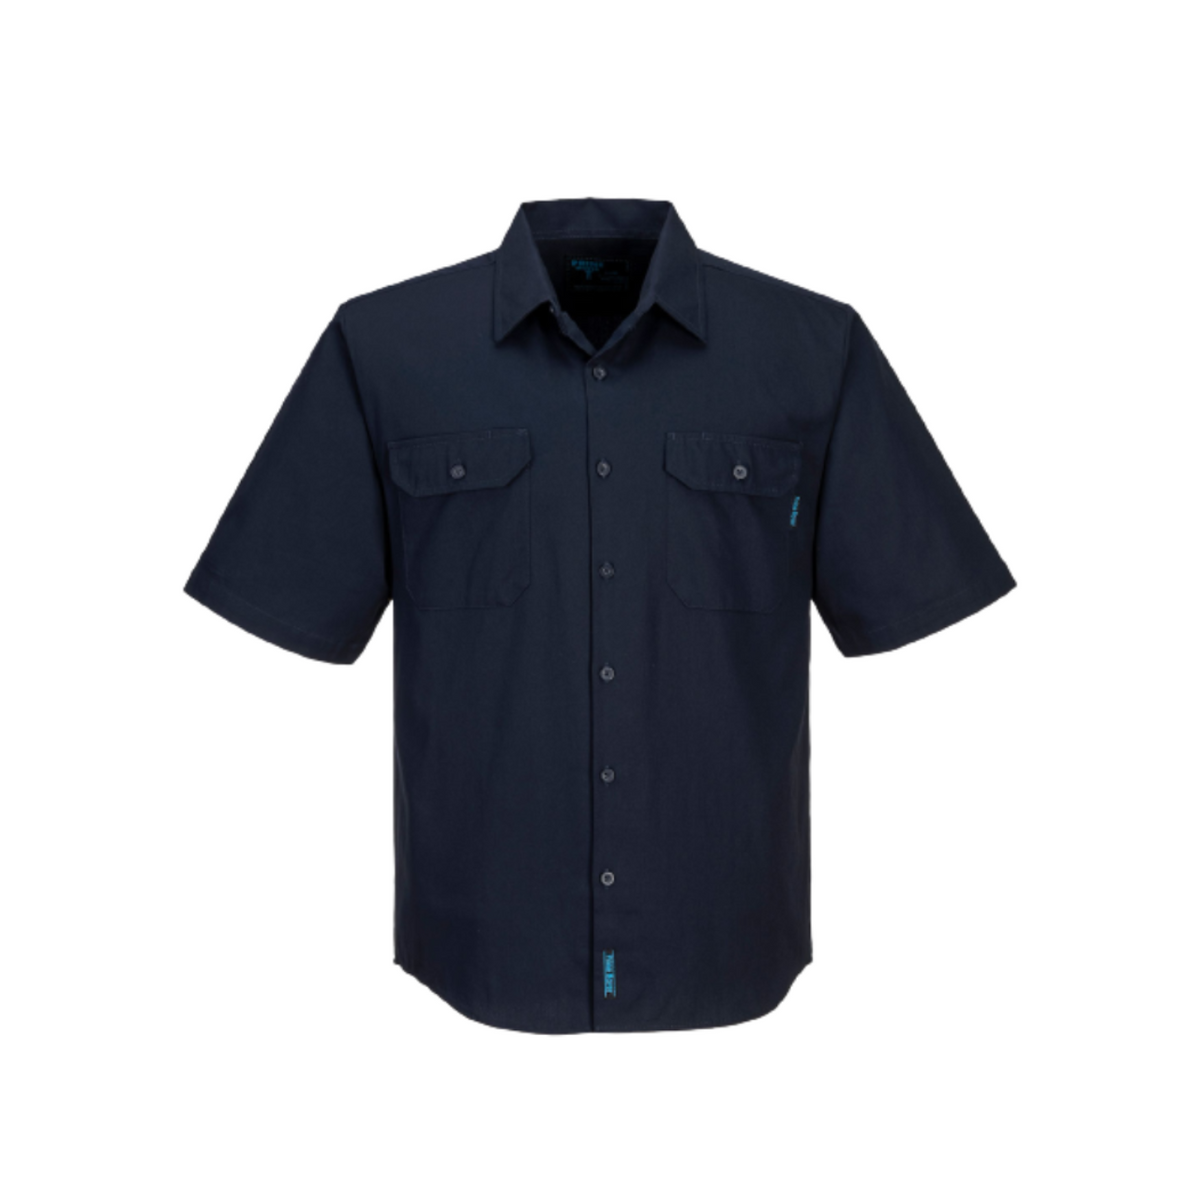 Portwest Adelaide Shirt, Short Sleeve, Regular Weight Cotton Polo Shirt MS905-Collins Clothing Co